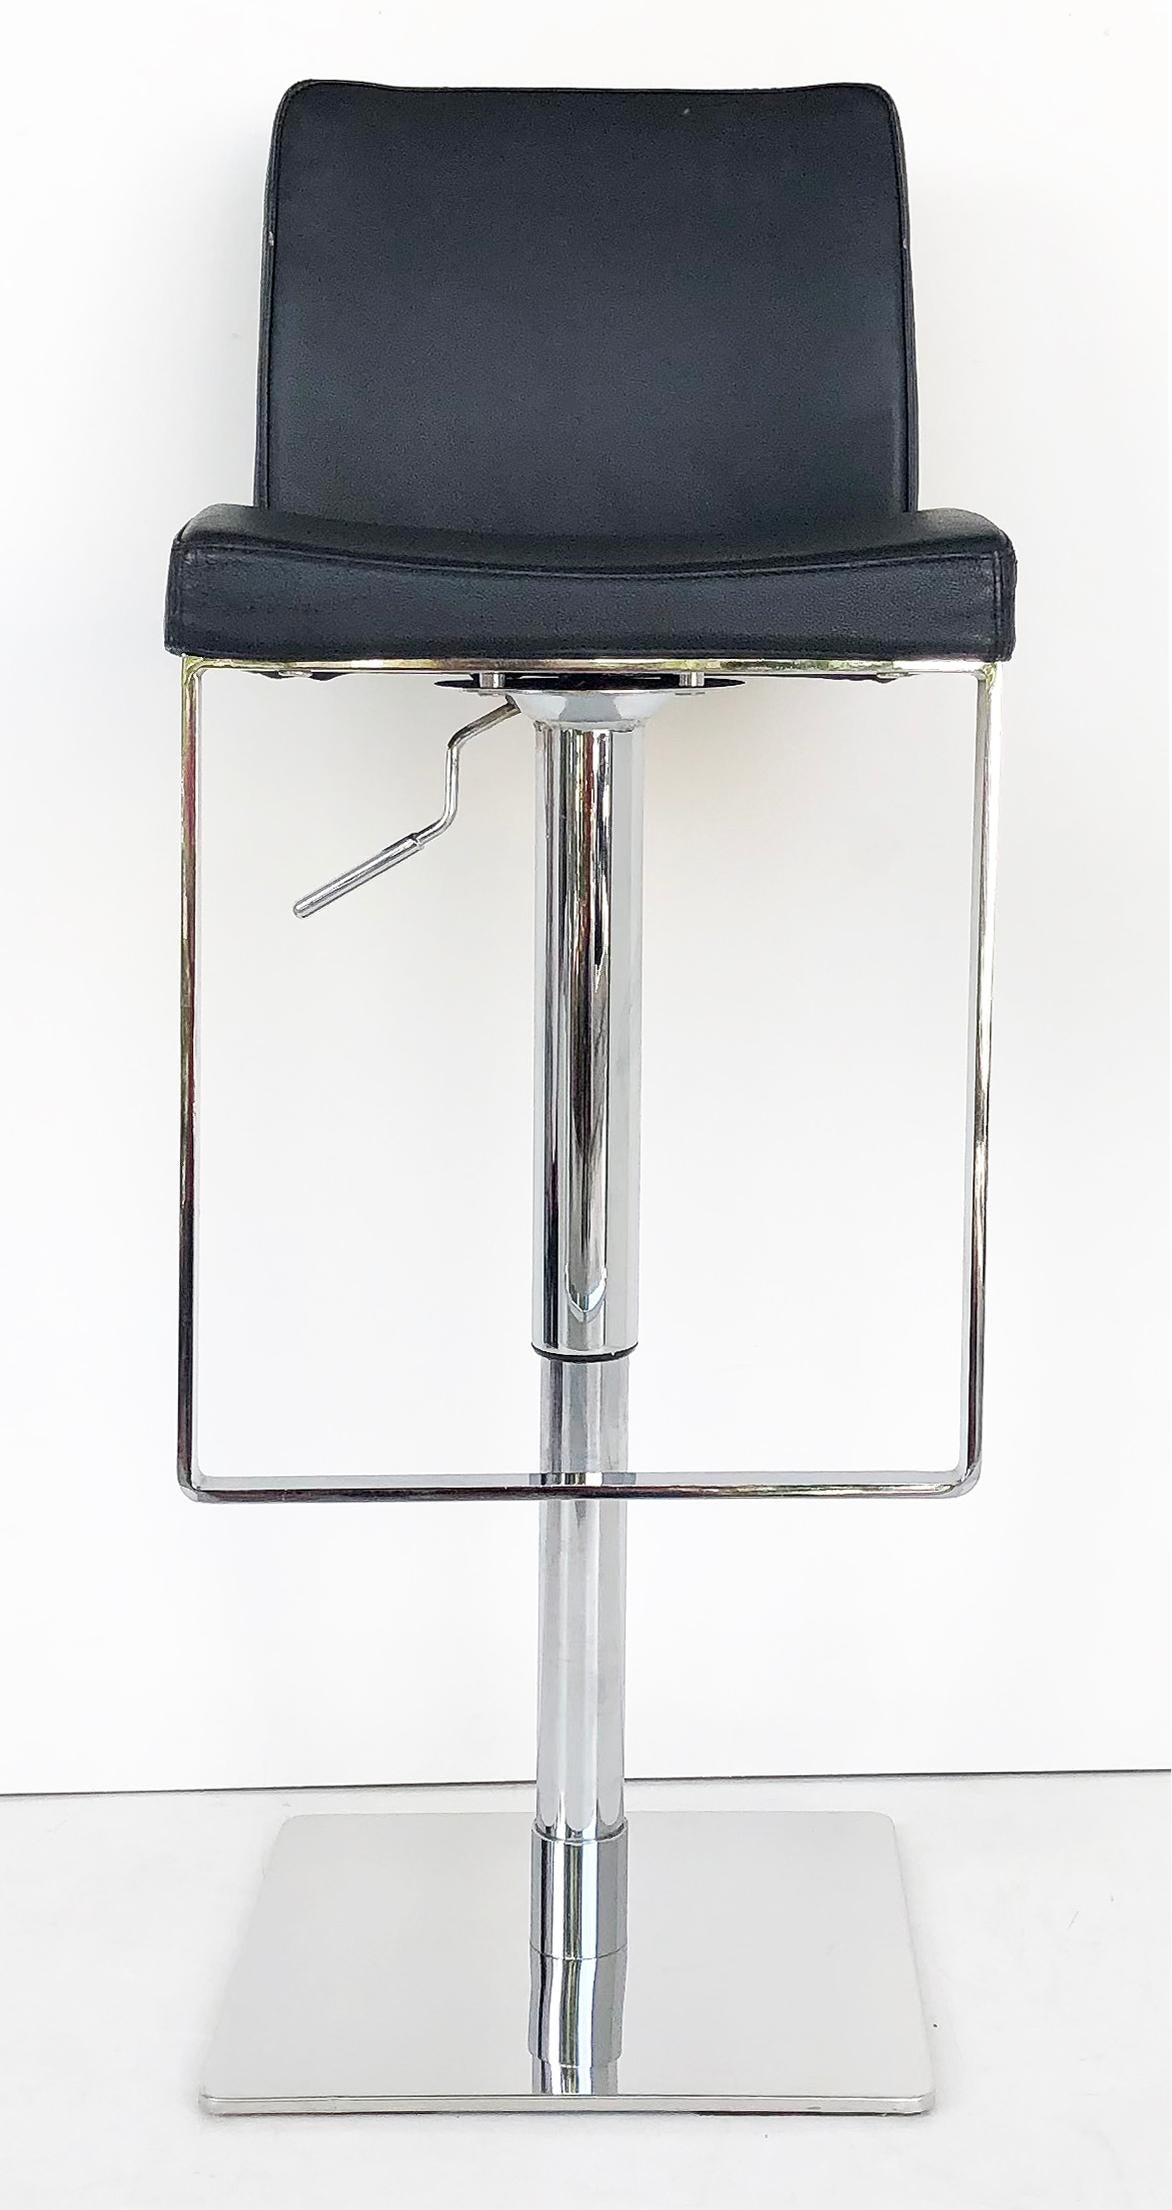 Adjustable stainless steel/leather counter/bar stools, set of 3

Offered for sale is a set of three stainless steel and bonded leather stools that can be adjusted to fit either bar height or counter height. These are great when you have a